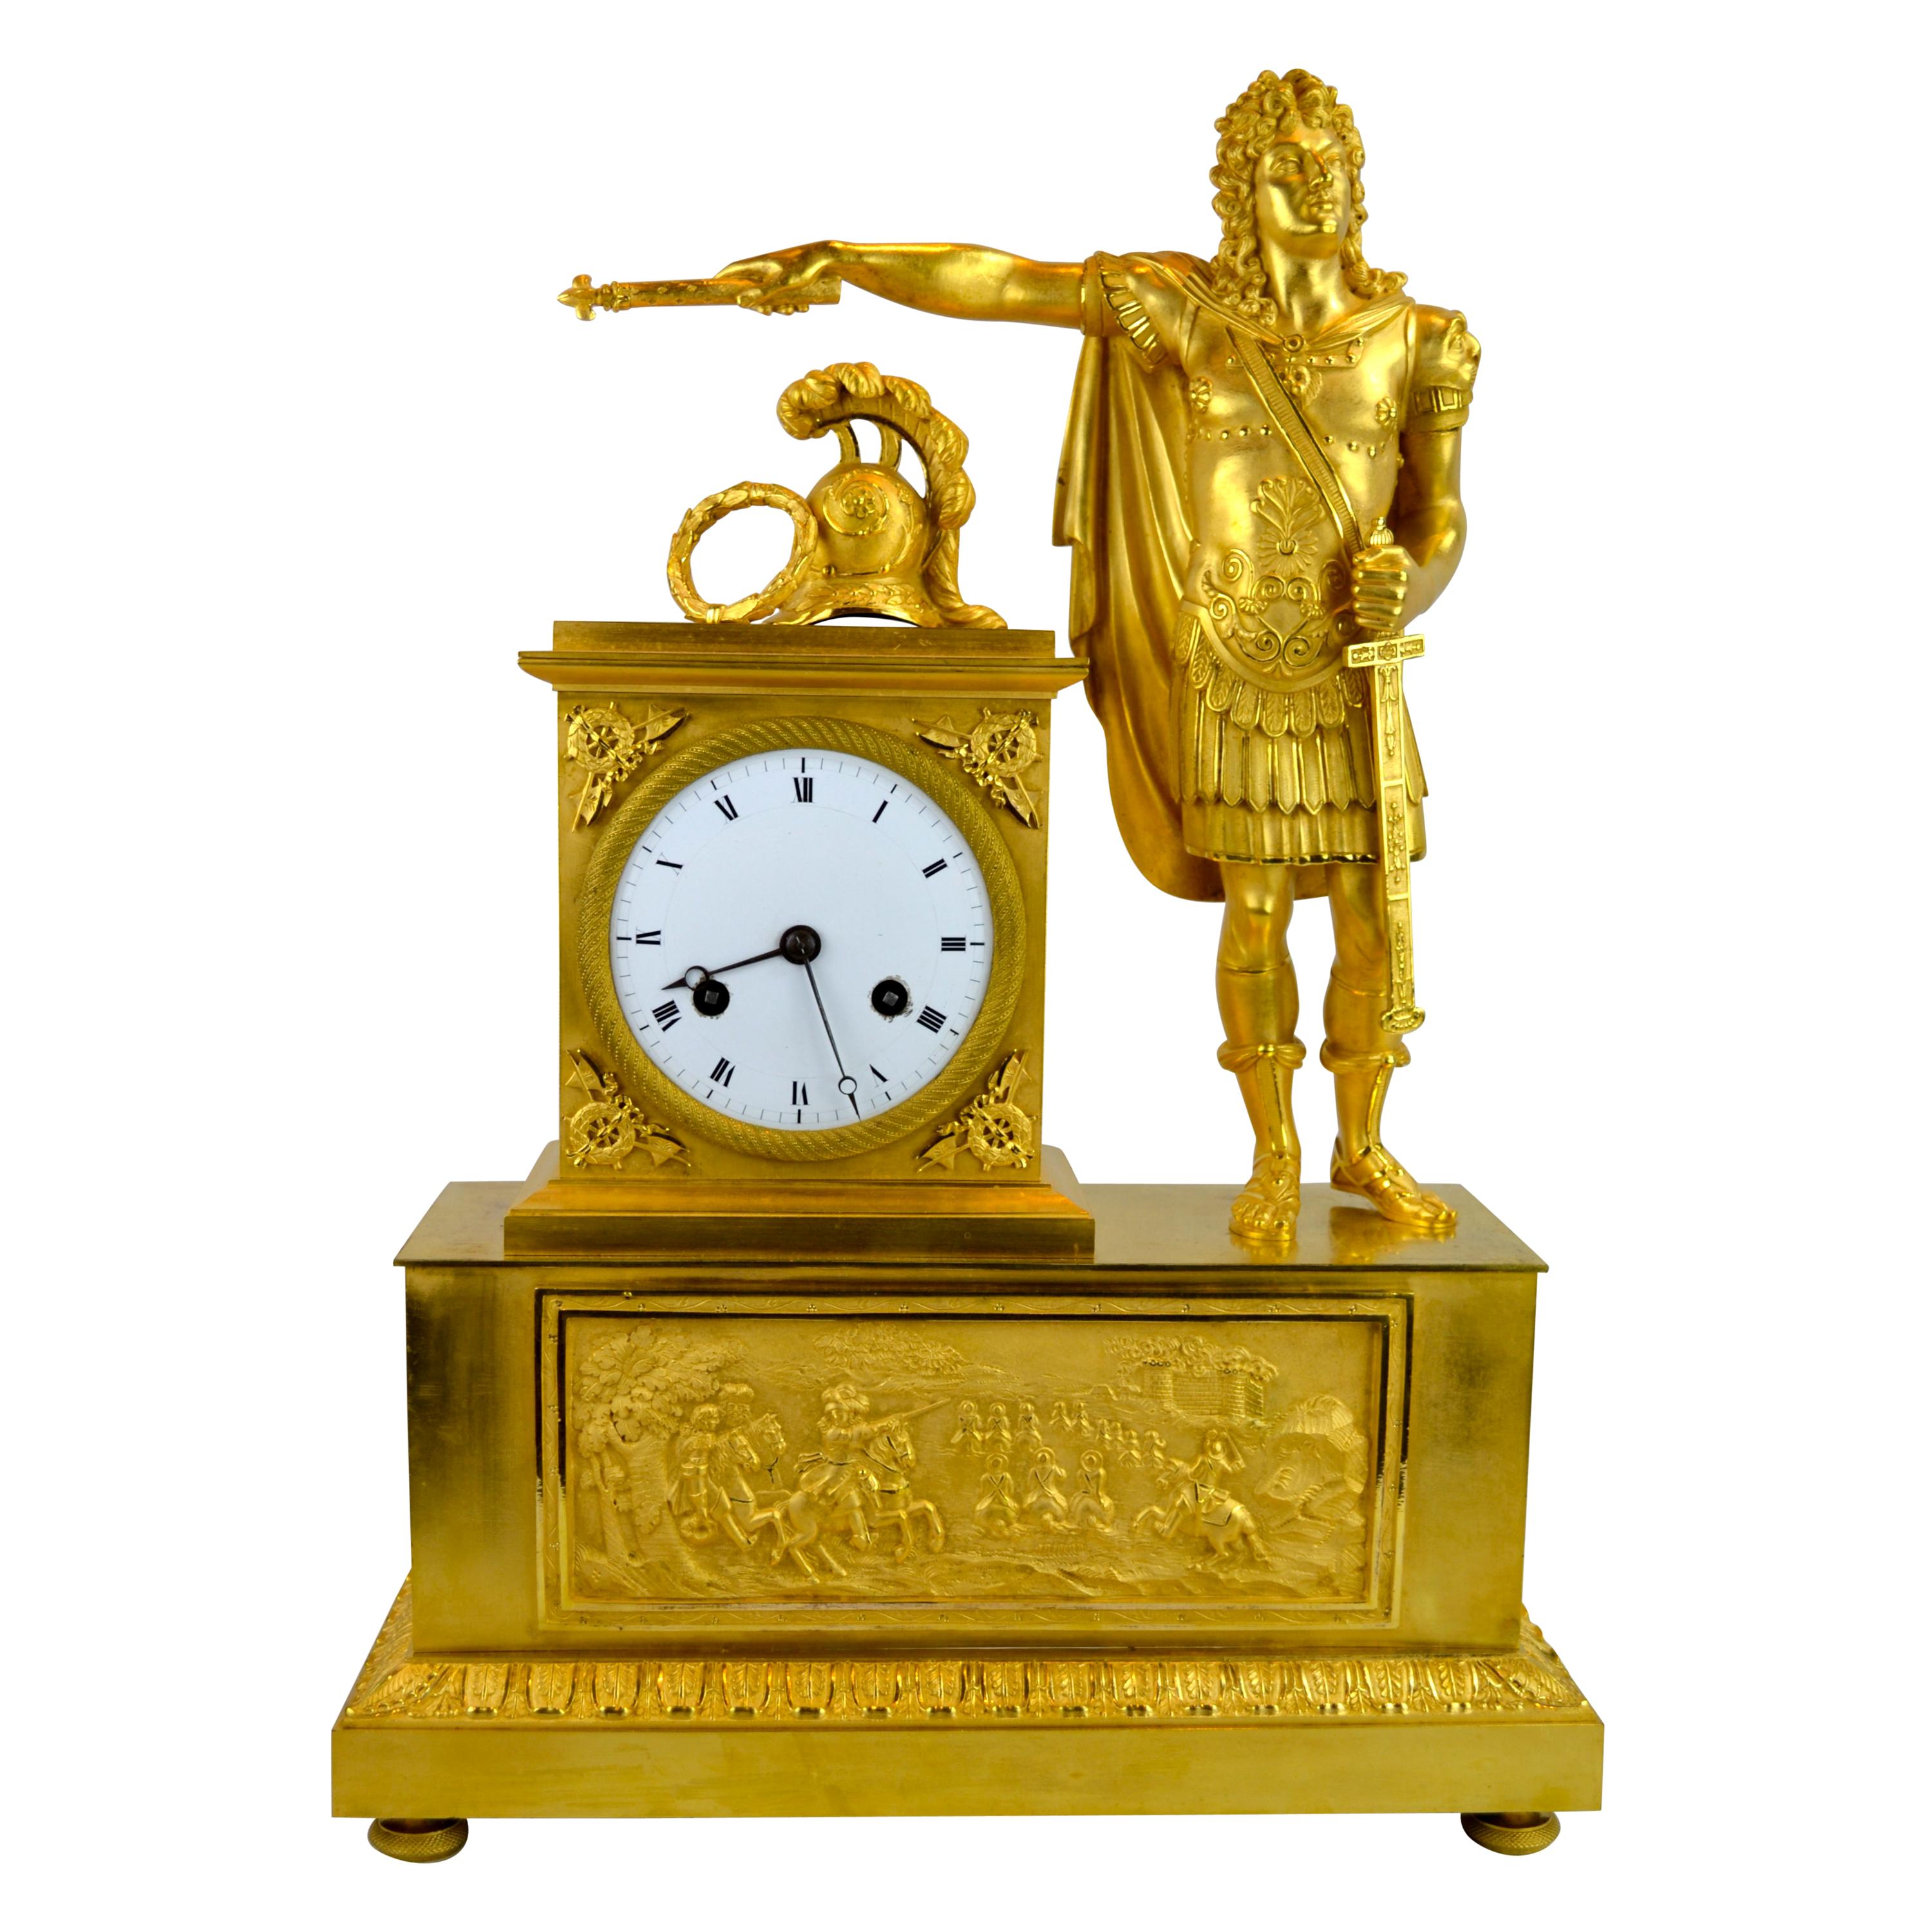 French Empire clock showing Louis XVI dressed as Caesar